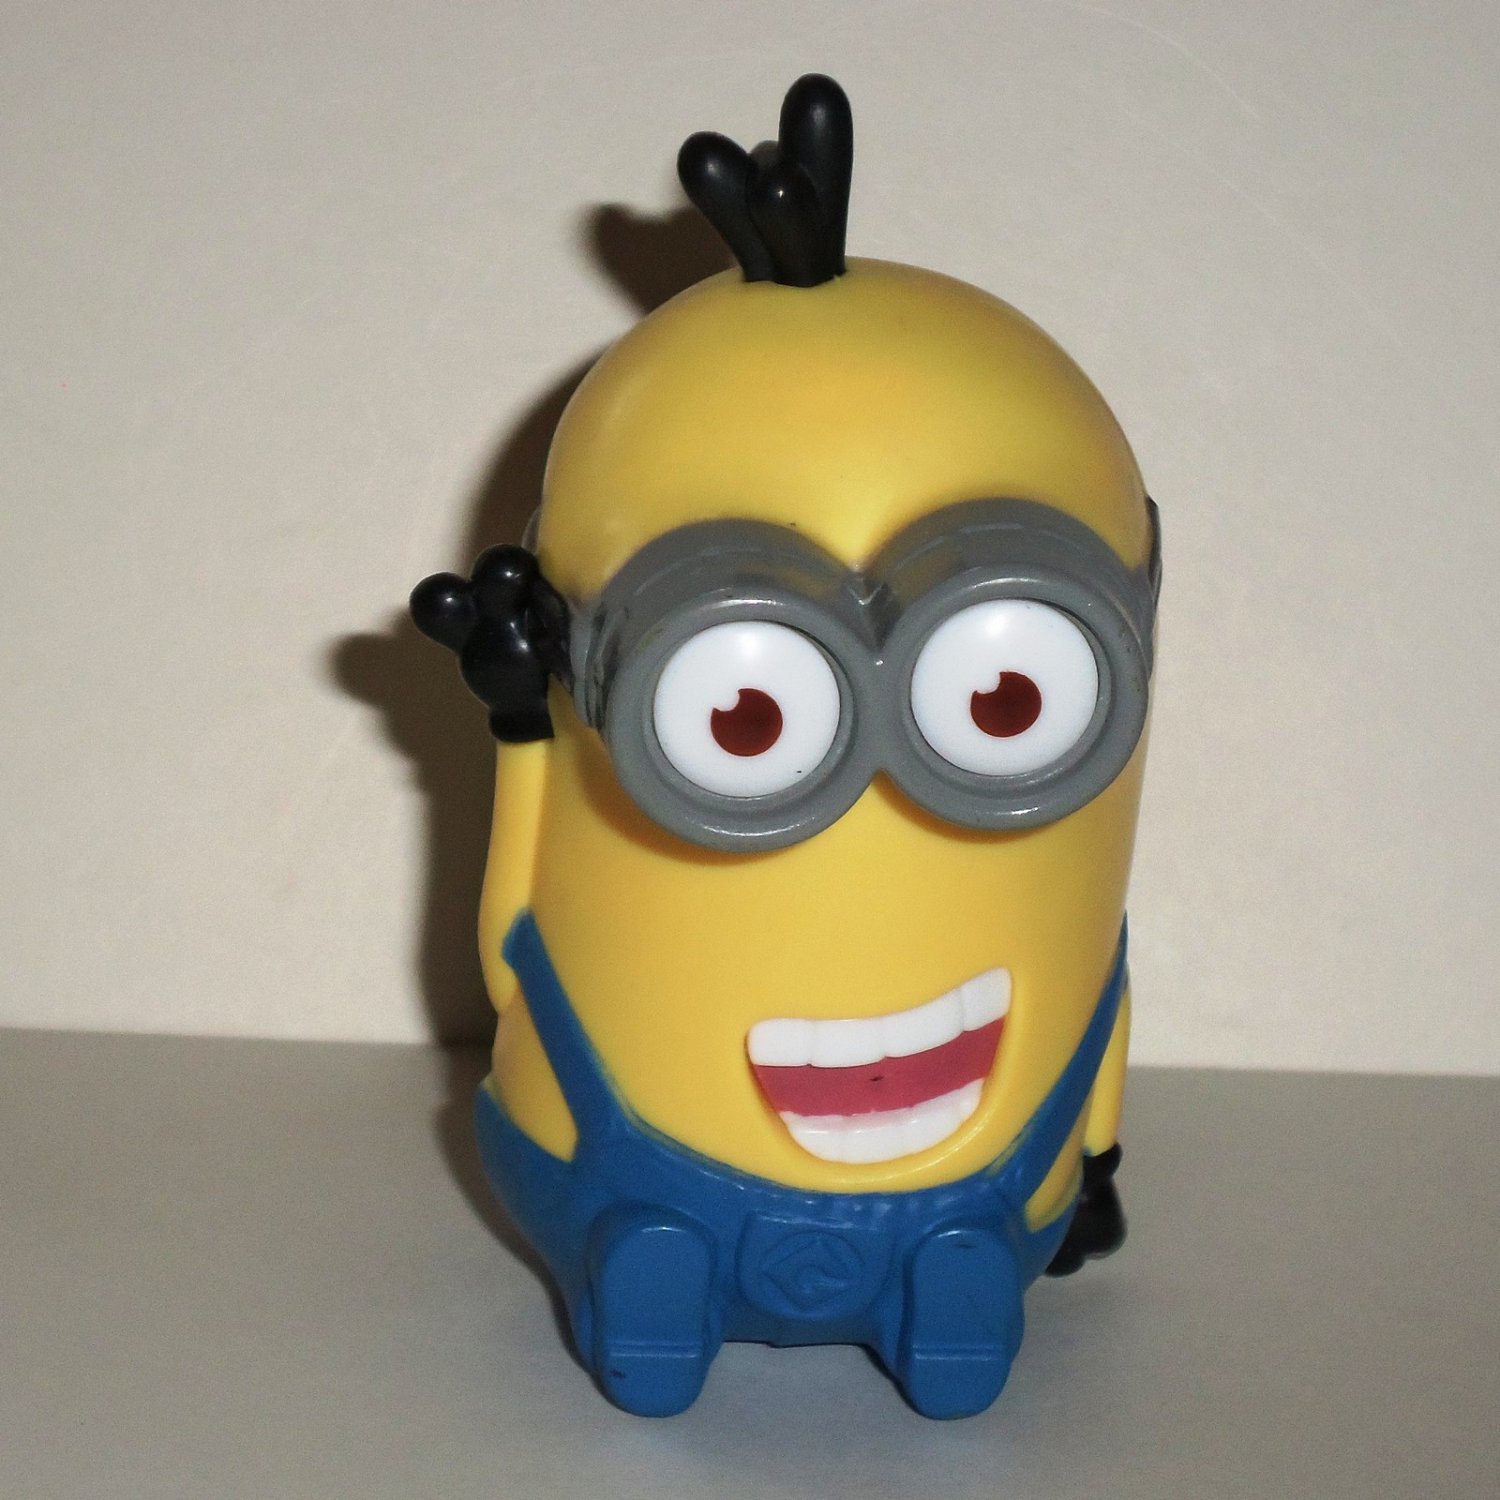 Despicable Me 2 McDonalds 2013 Happy Meal Minion Toy-Tim Giggling